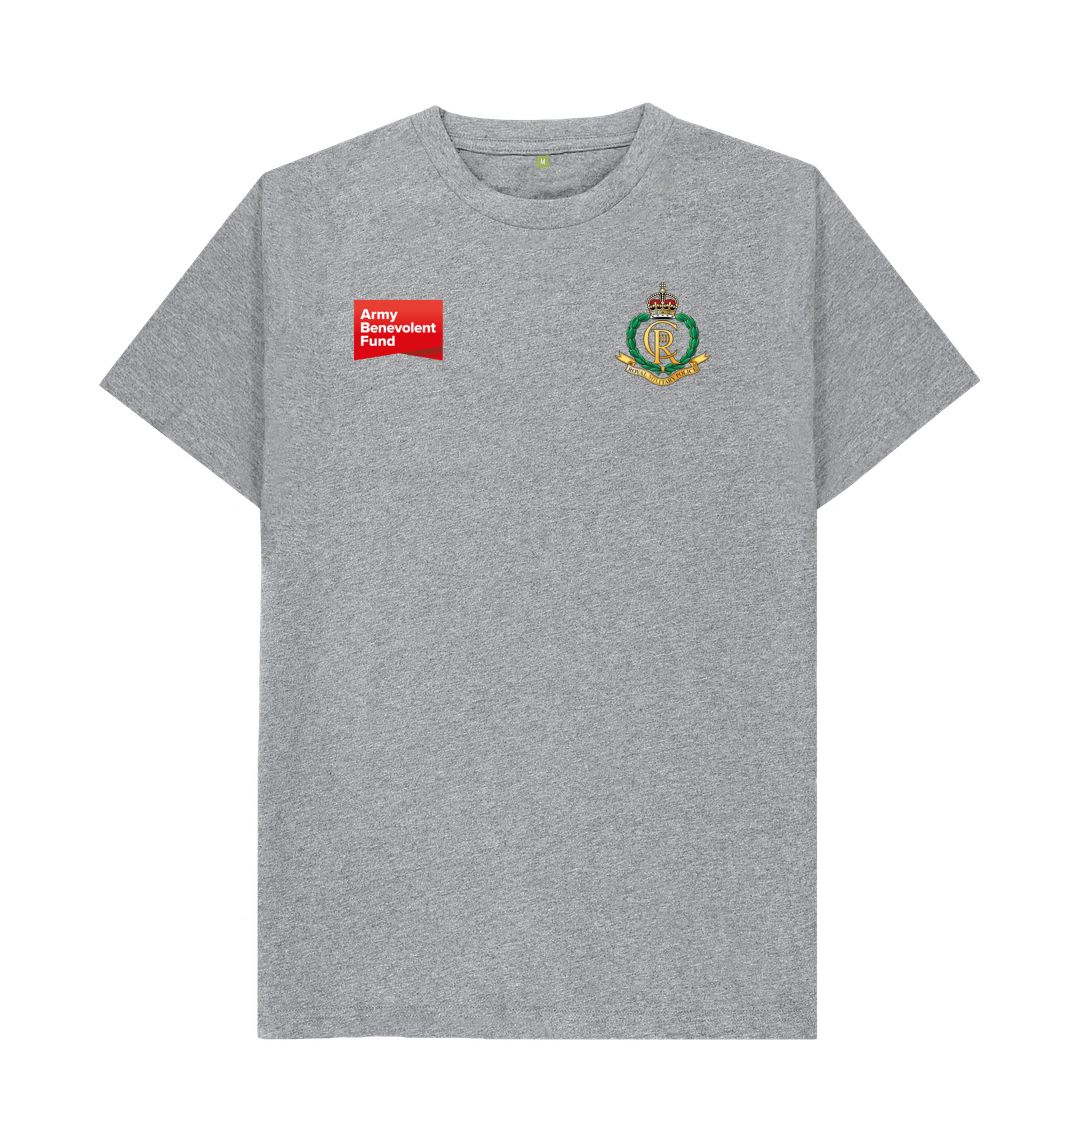 Adjutant General's Corps of Royal Military Police Unisex T-shirt - Army Benevolent Fund